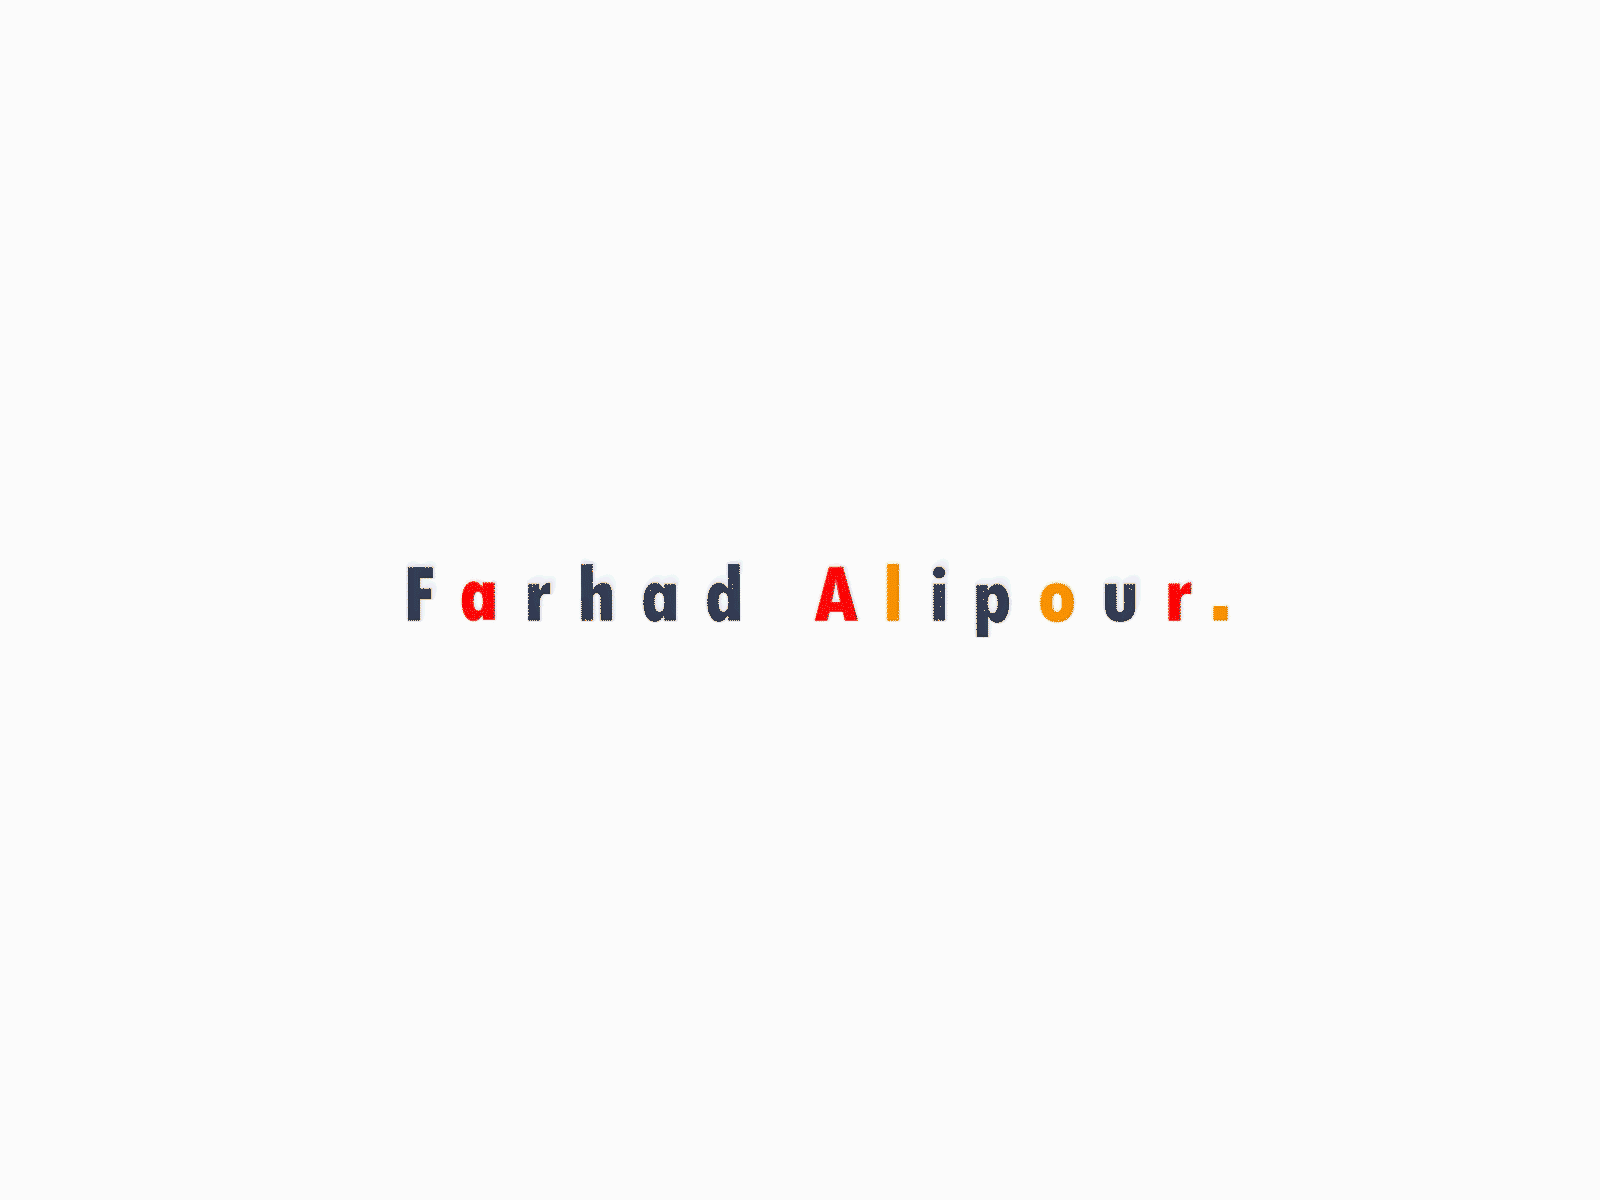 this is farhad! with some text animations! animation logo logo motion logoanimation logomotion loop animation typography